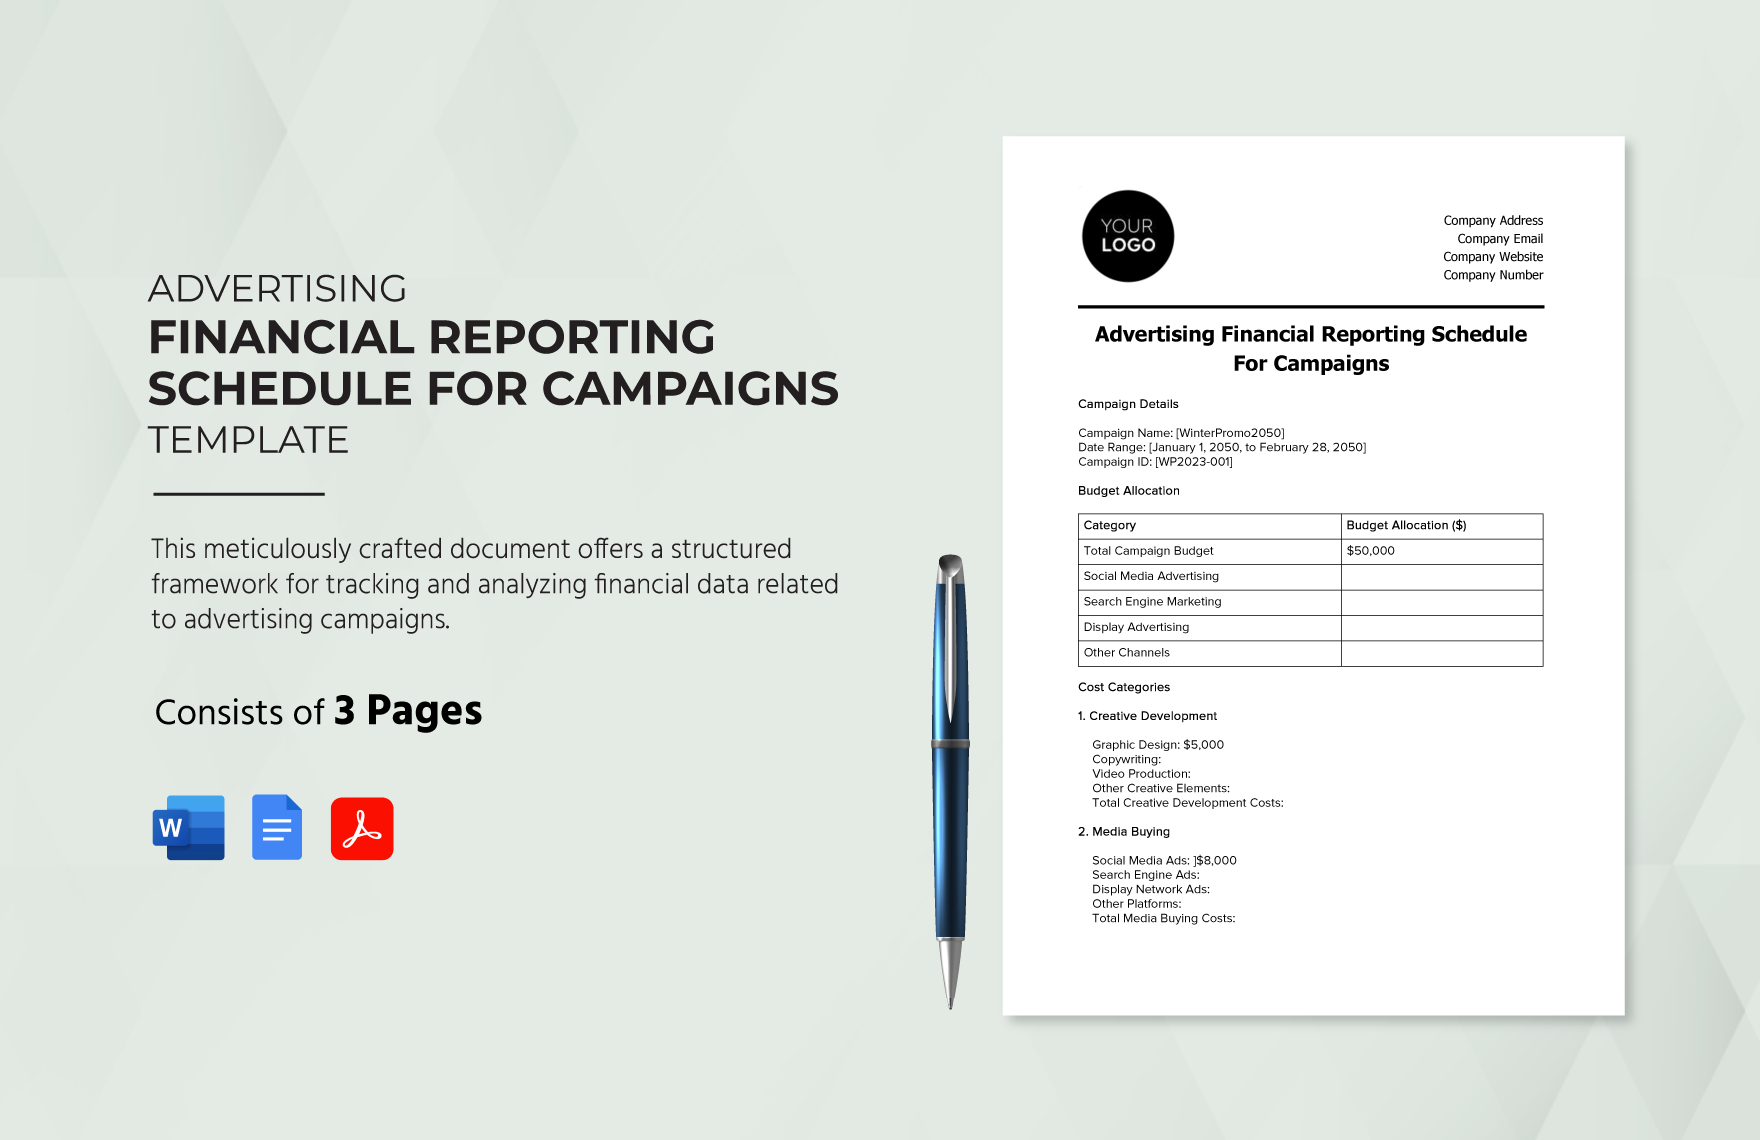 Advertising Financial Reporting Schedule for Campaigns Template in Word, Google Docs, PDF